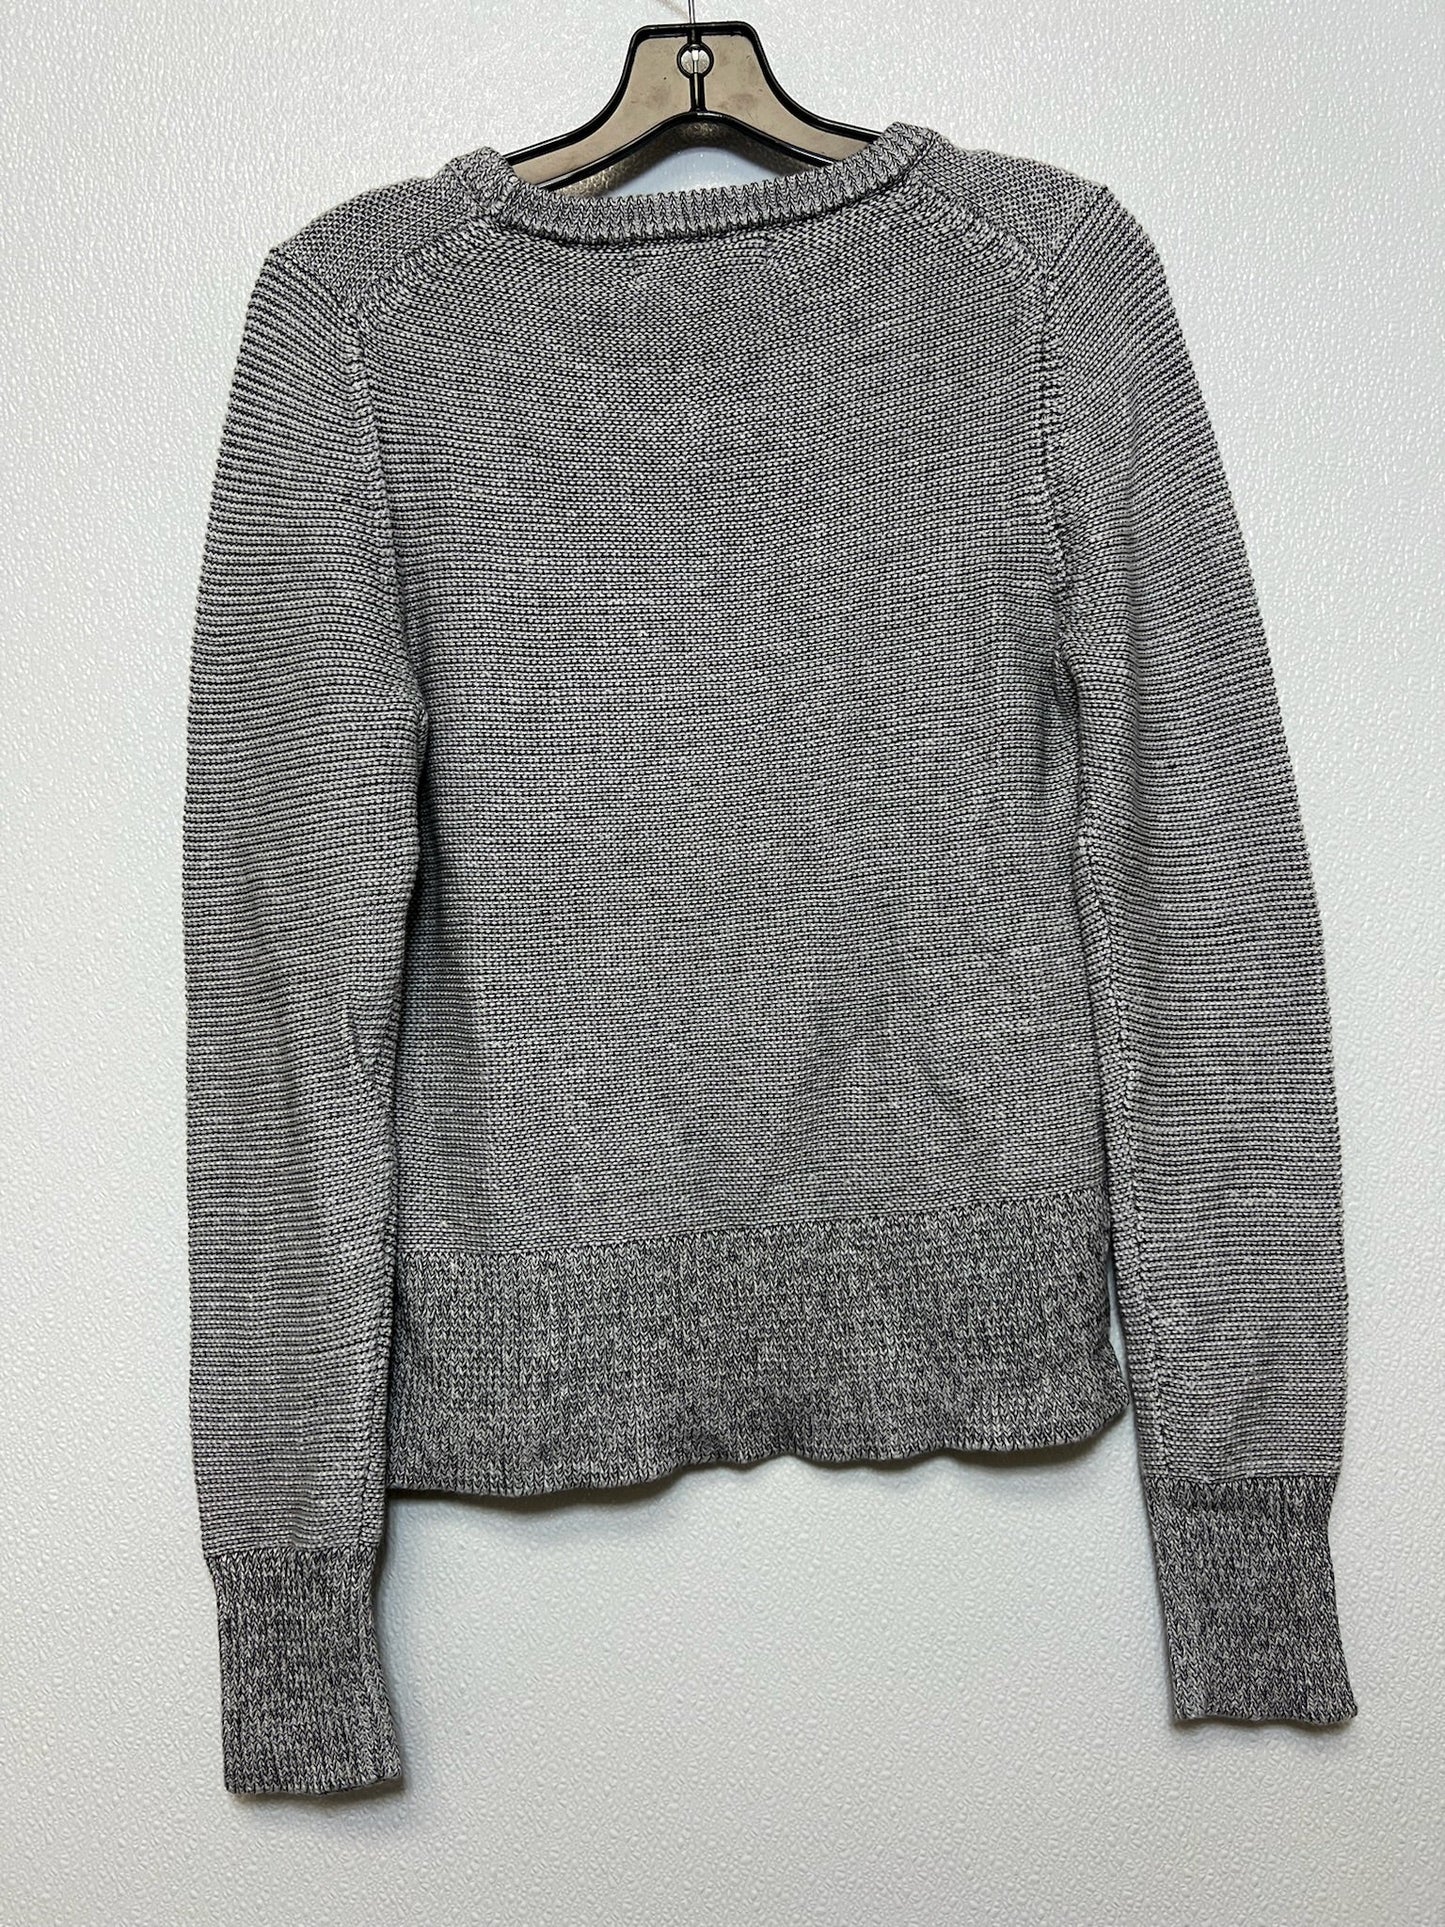 Sweater By Calvin Klein O  Size: M